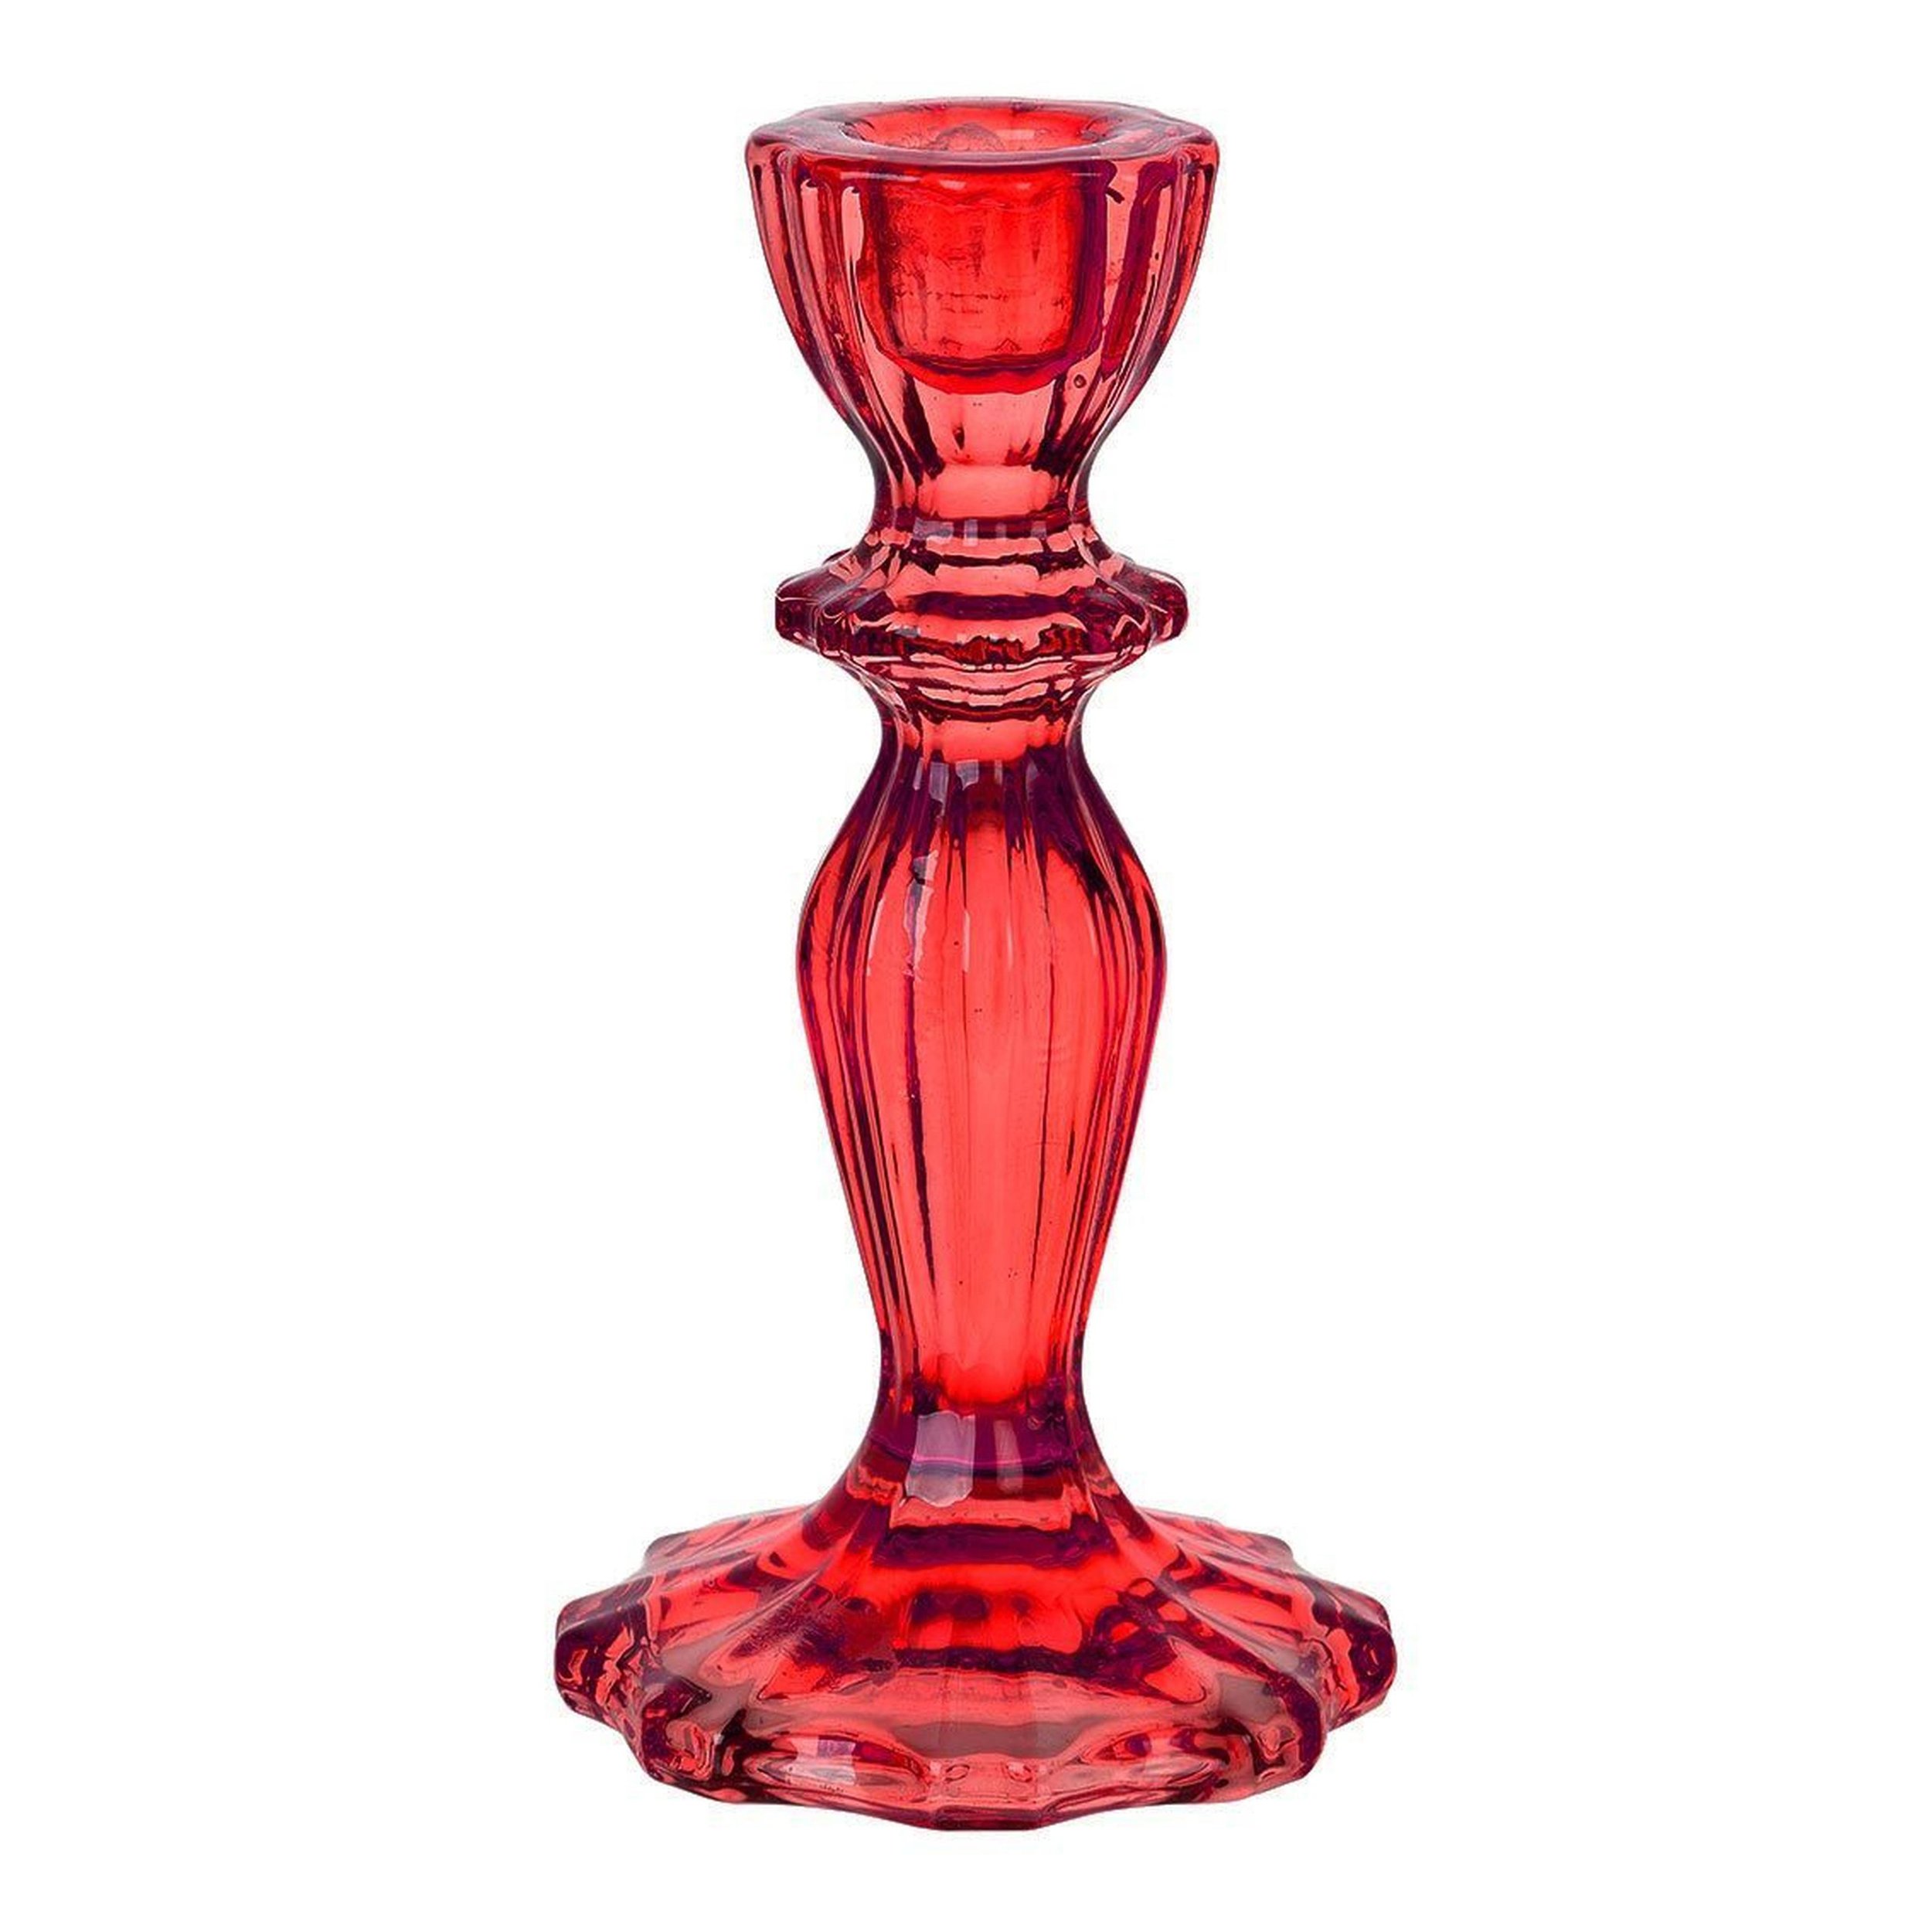 ANNABEL JAMES Red Candle Holder €16.53, 